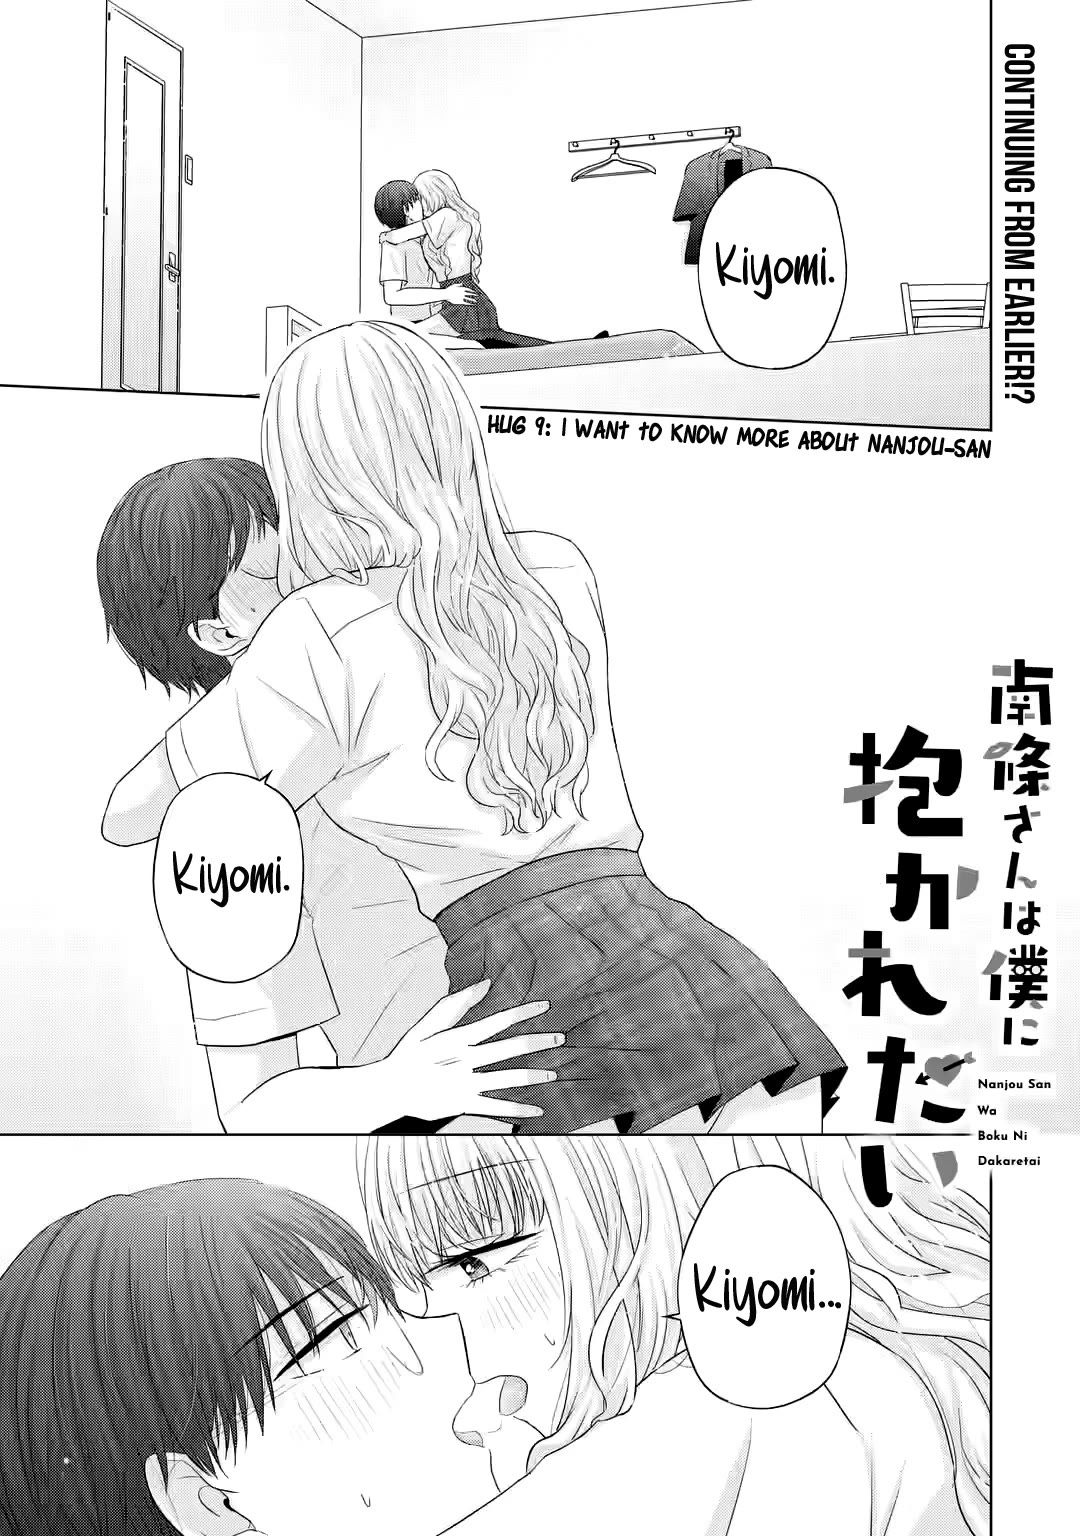 Nanjou-san Wants to Be Held by Me - chapter 9 - #2